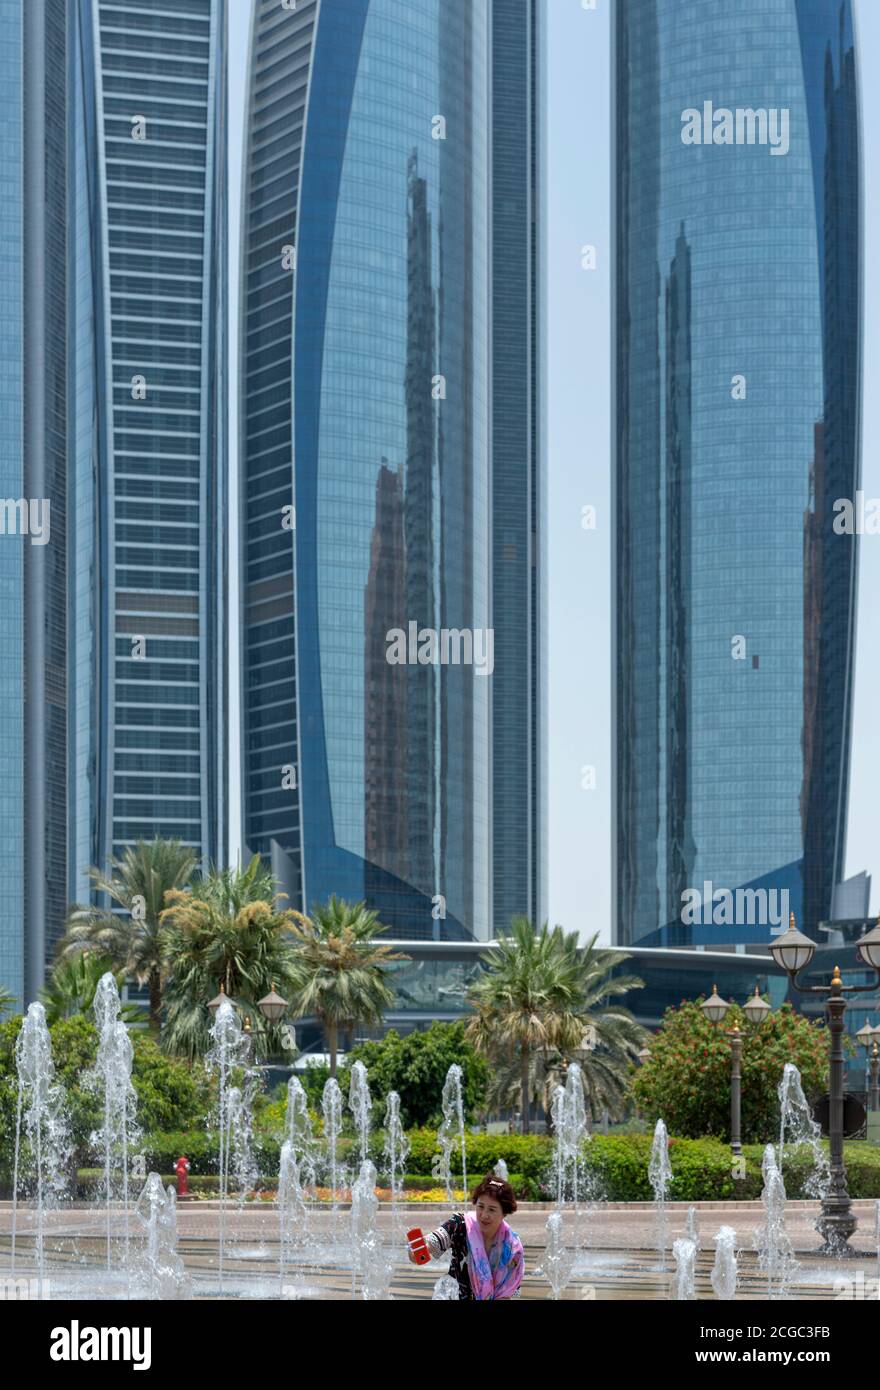 A tourist taking a selfie in the water fountain feature in front of the Etihad Towers, Abu Dhabi. Stock Photo